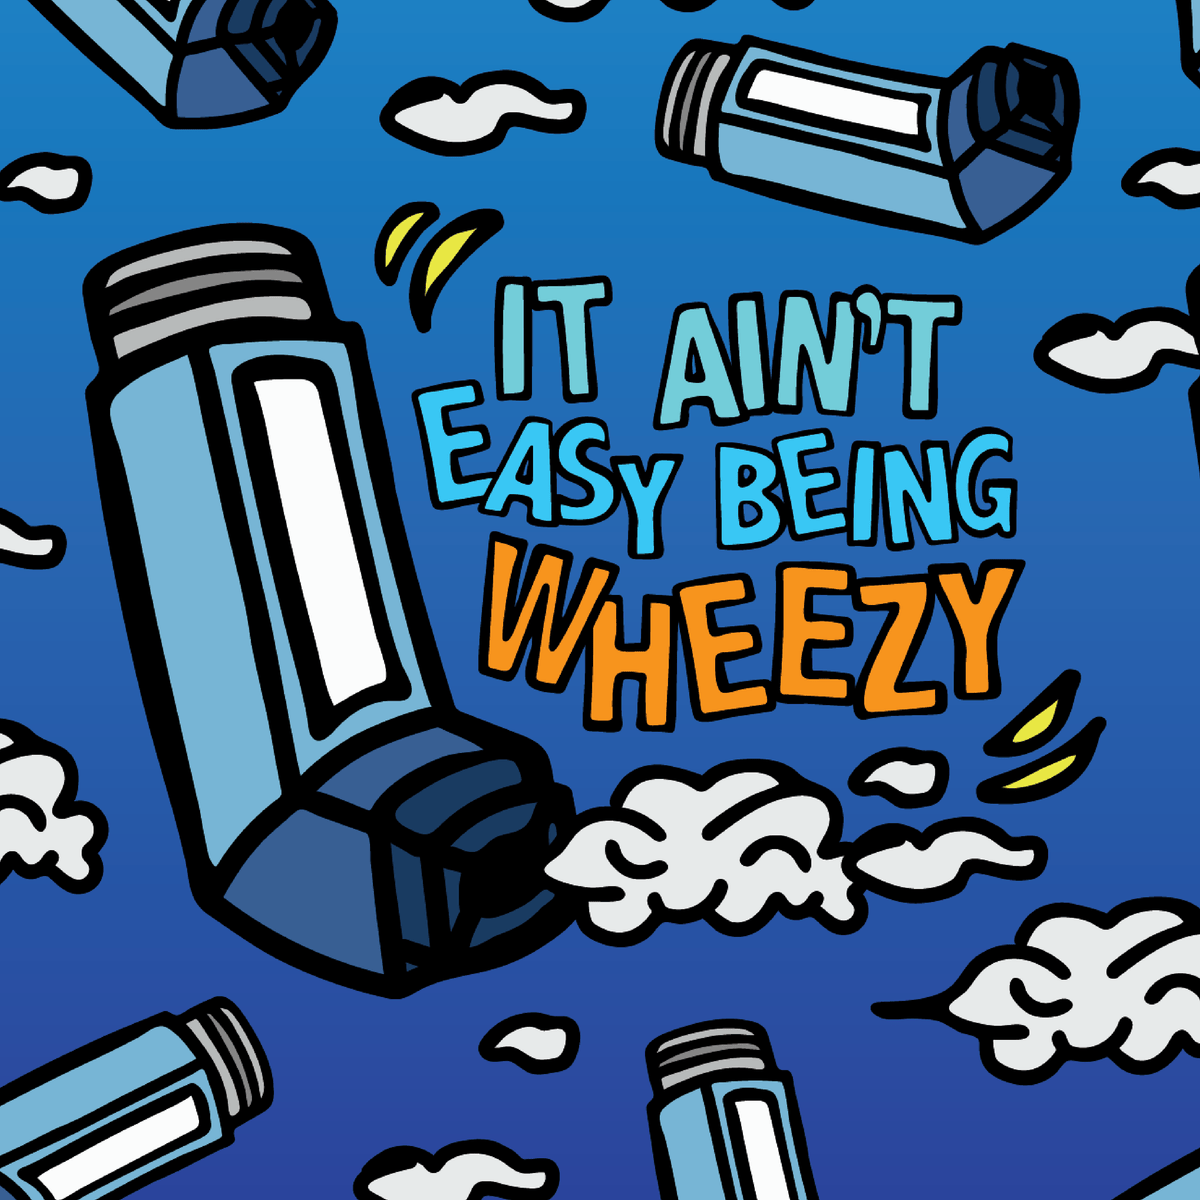 17+ It Aint Easy Being Wheezy